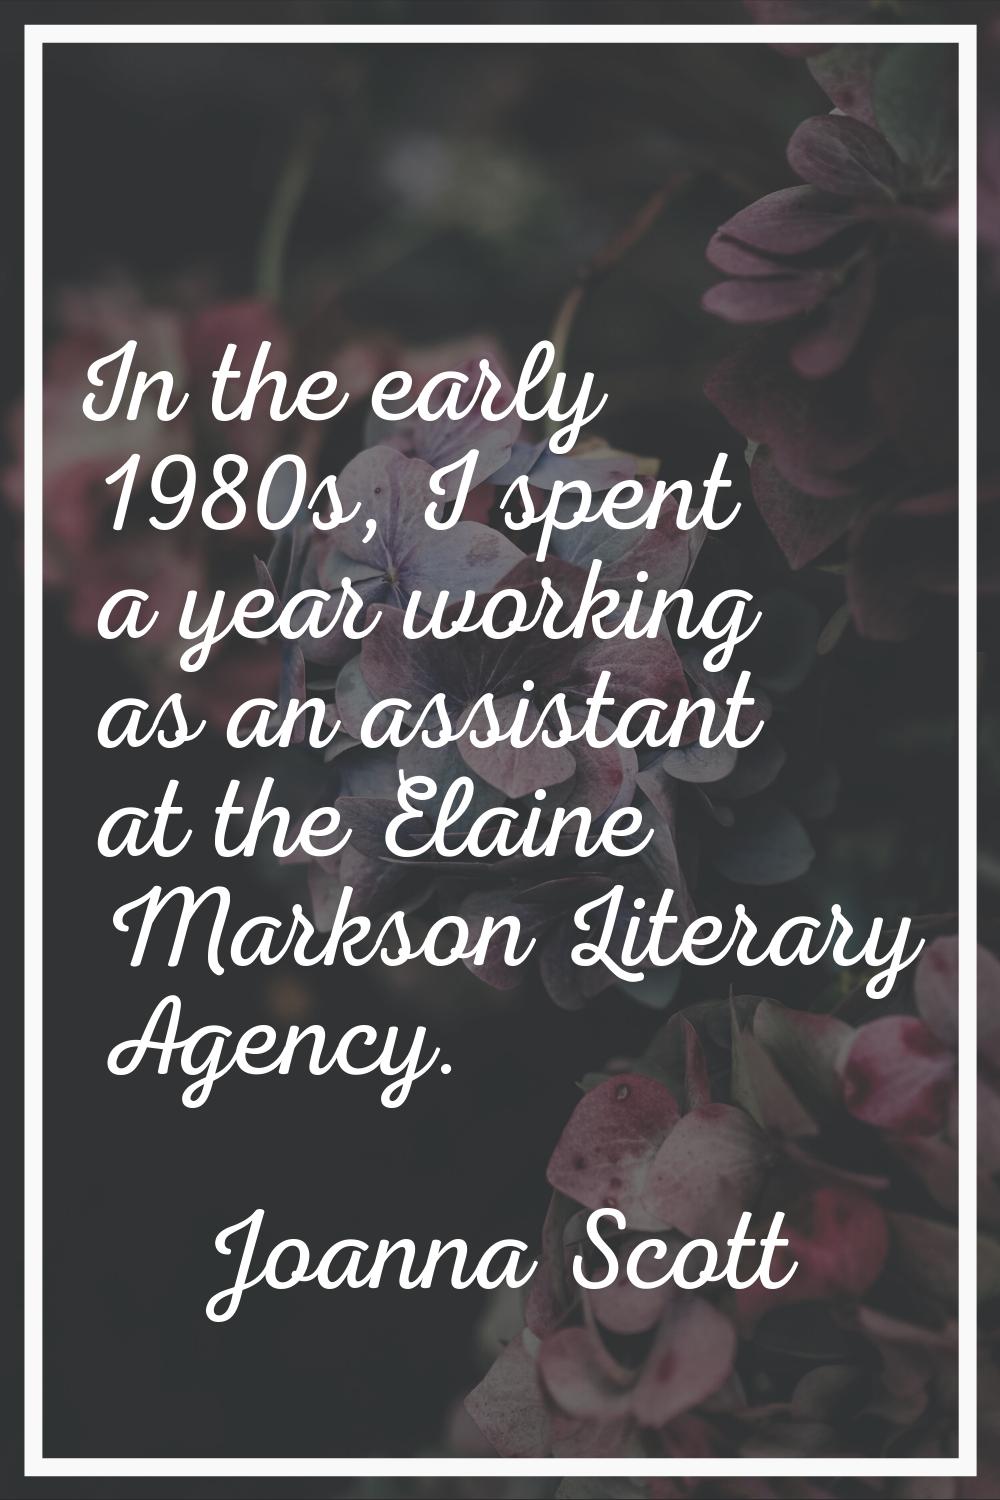 In the early 1980s, I spent a year working as an assistant at the Elaine Markson Literary Agency.